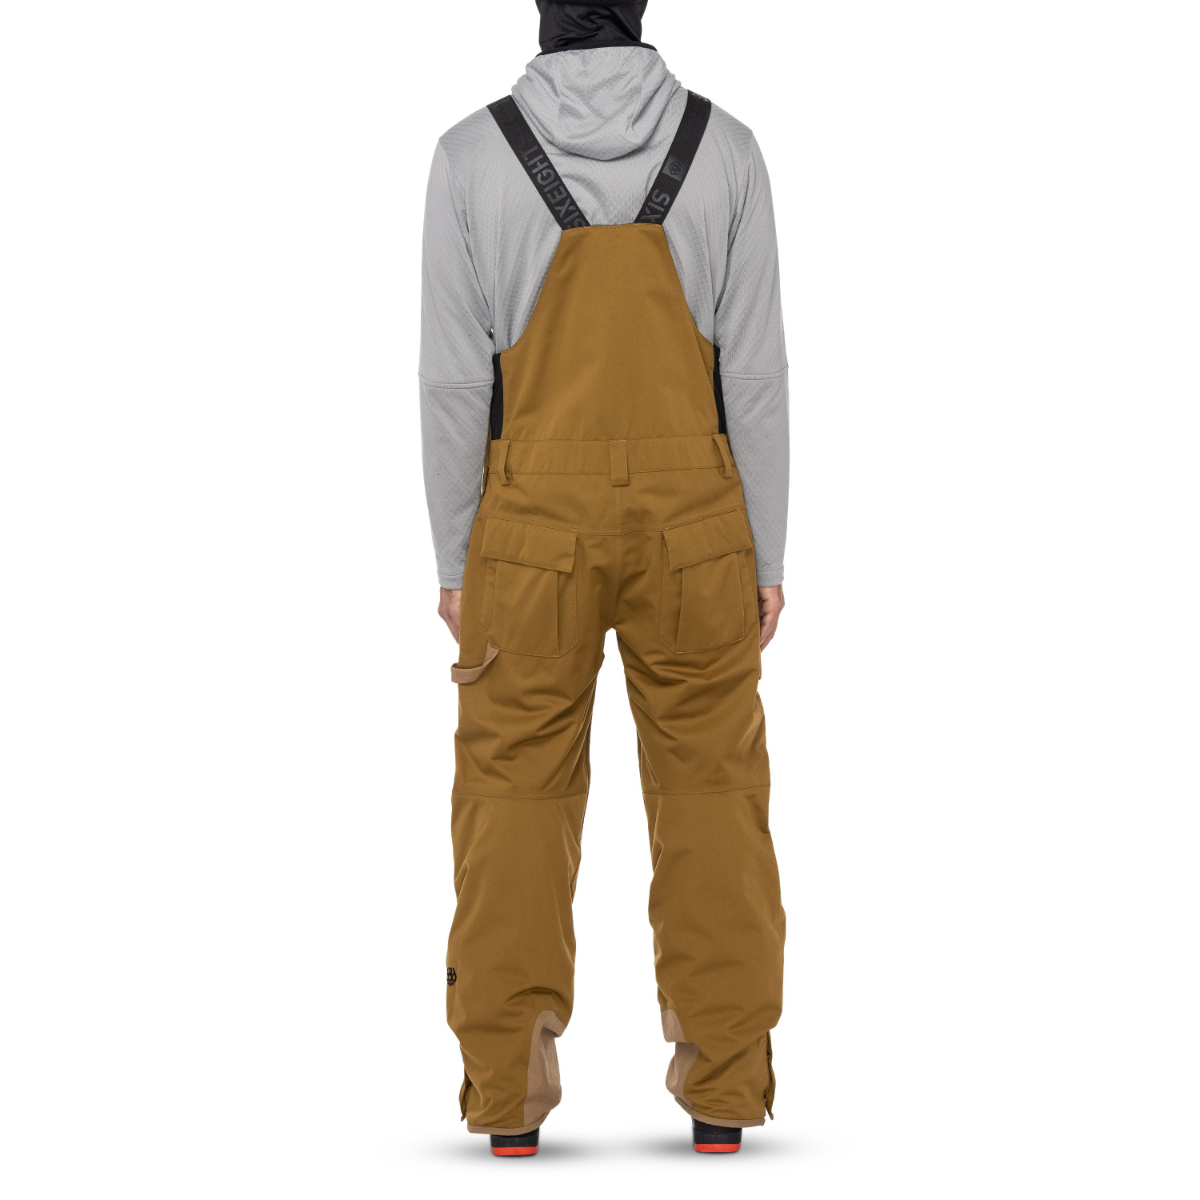 Backcountry Last Chair Stretch Insulated Bib Pant - Men's - Men